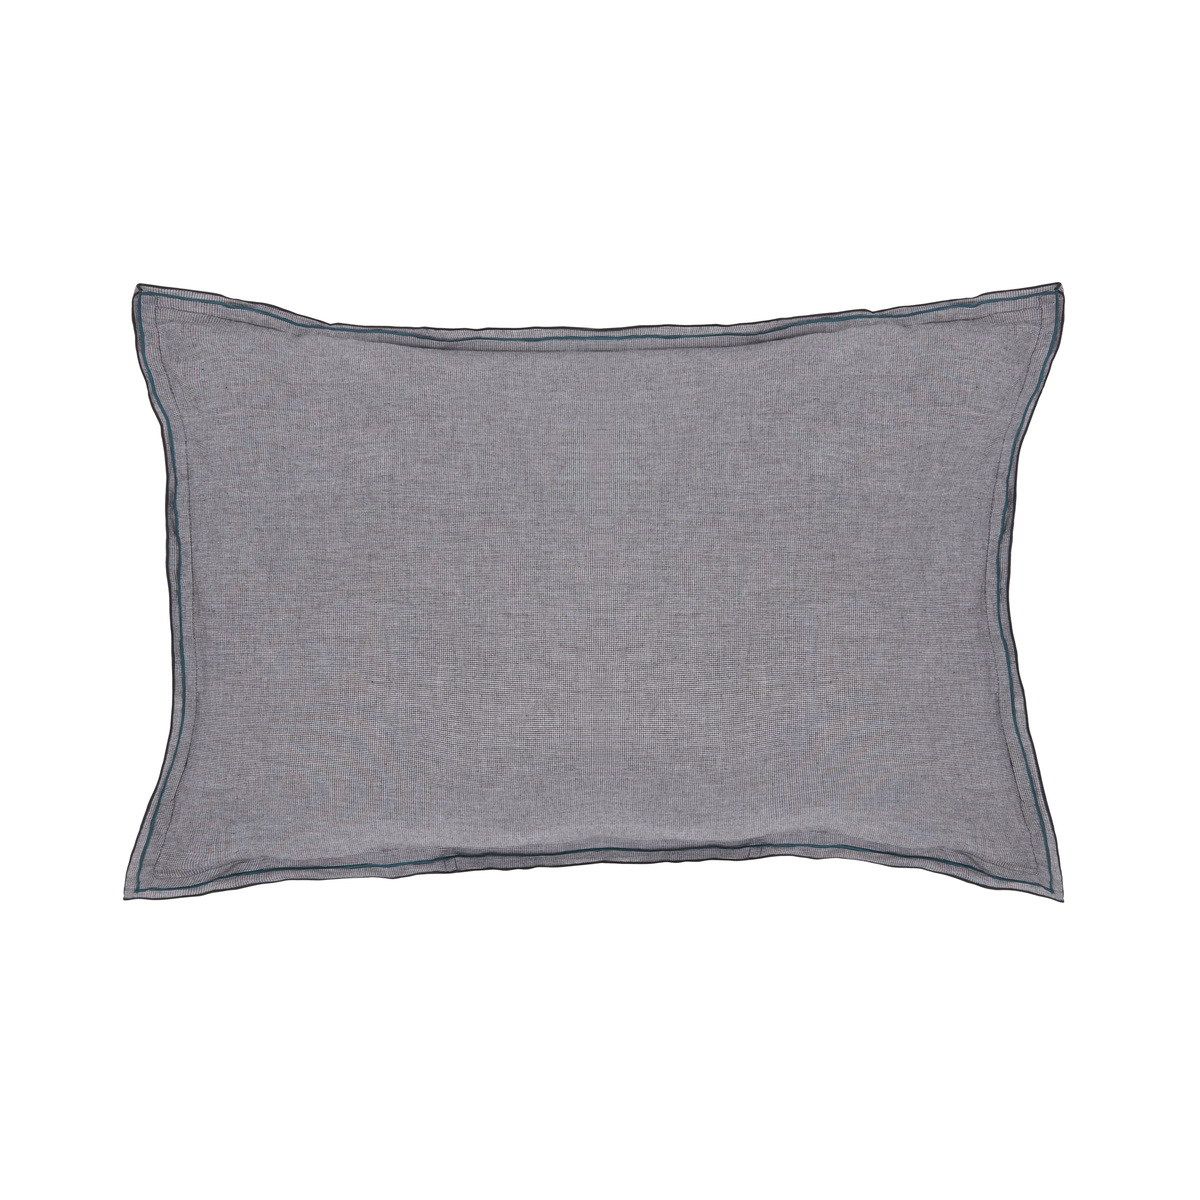 Pillowcases Morphee x2, Various colours - 26 x 26 in - 100% Organic Cotton - image 1